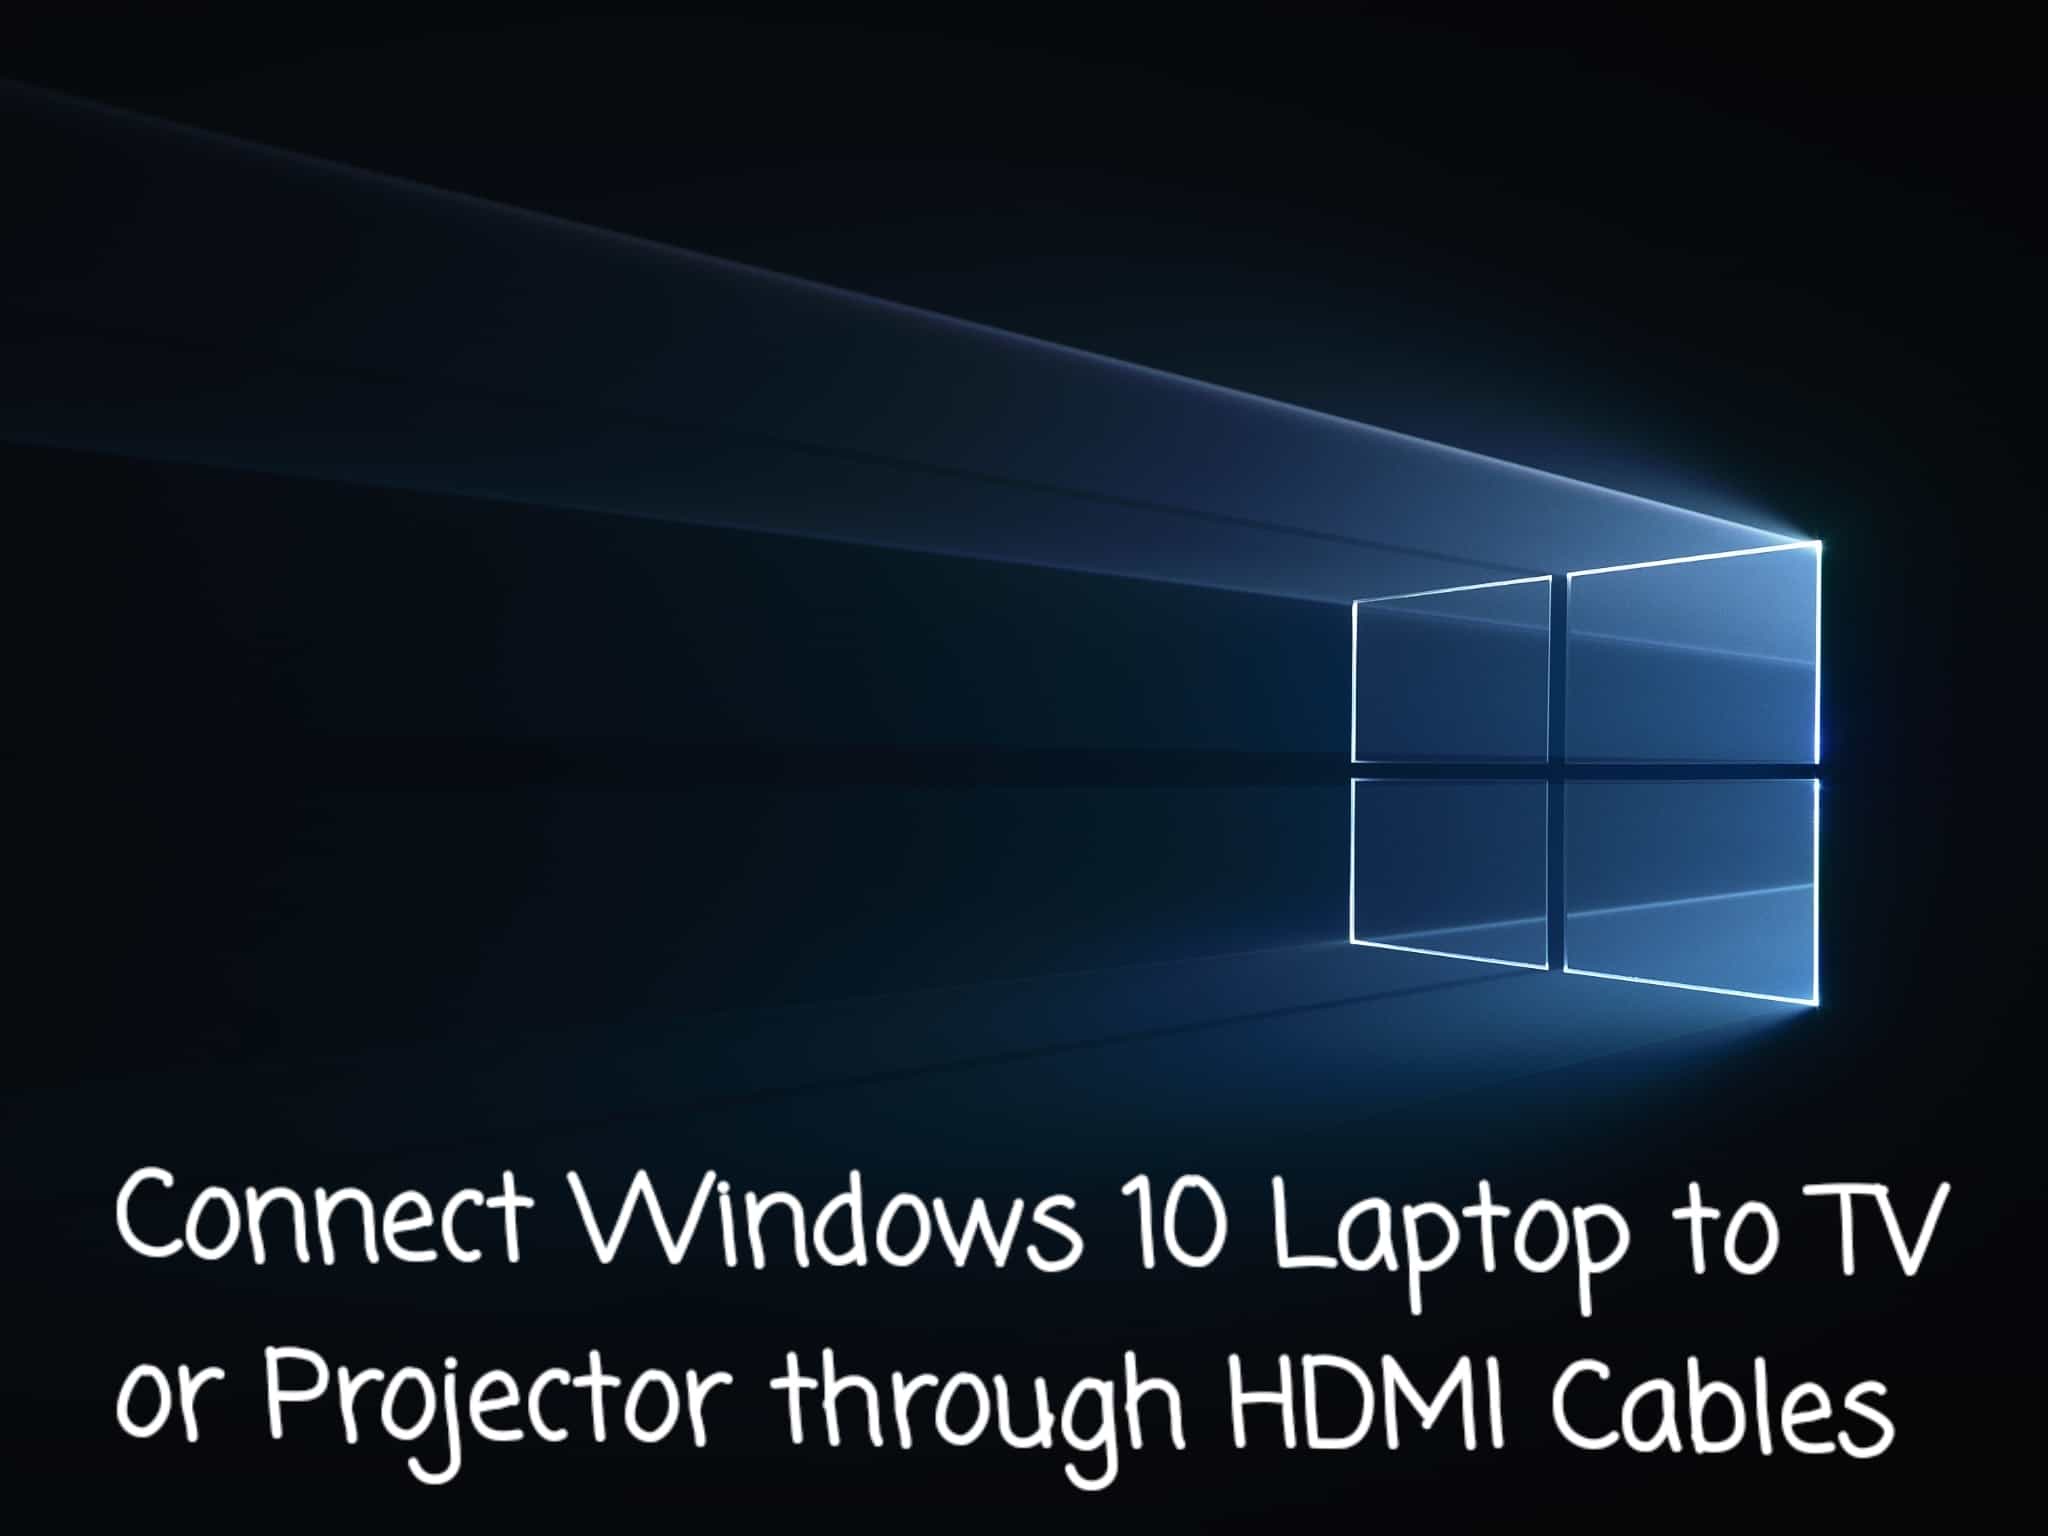 Connect Windows 10 Laptop to TV or Projector through HDMI Cables